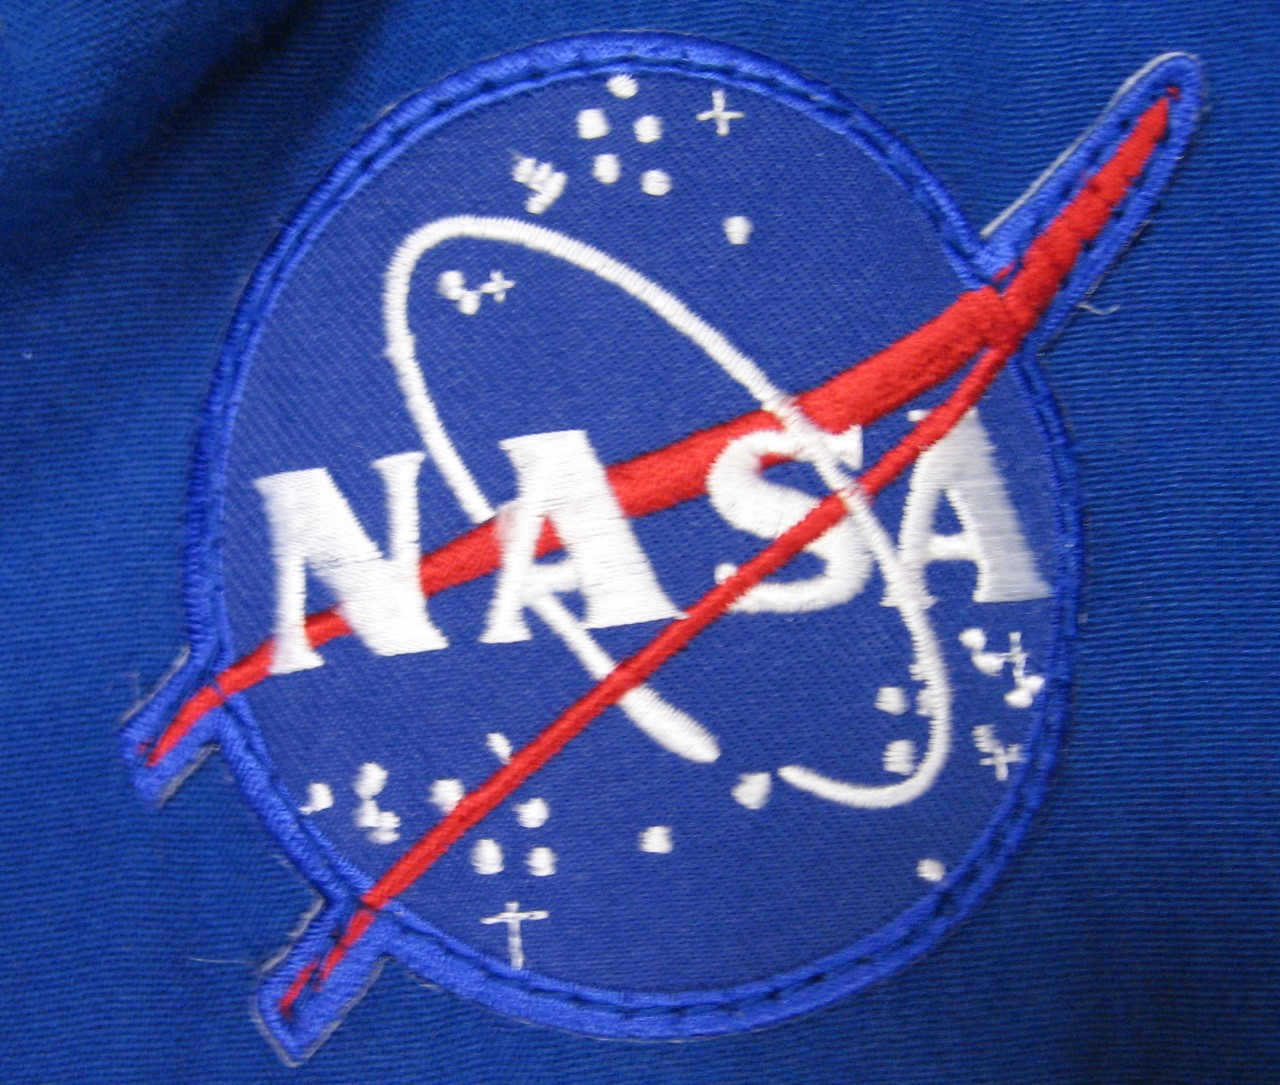 NASA patch on right chest of NASA coveralls.